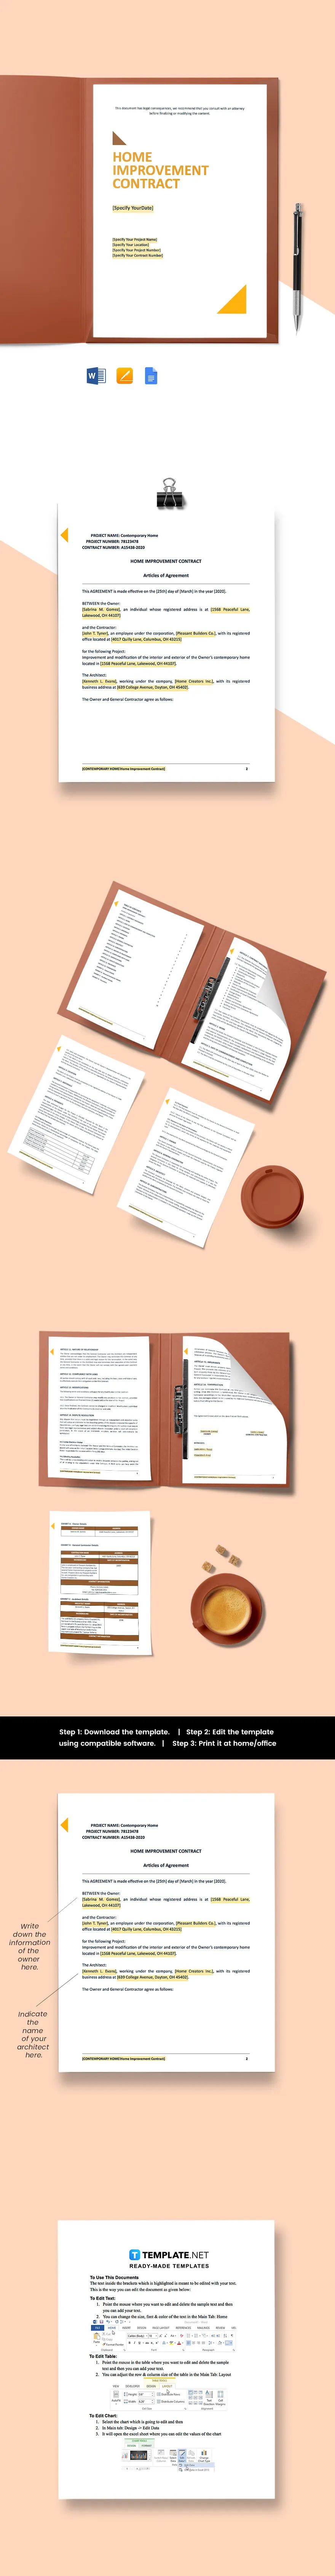 Home Improvement Contract Template